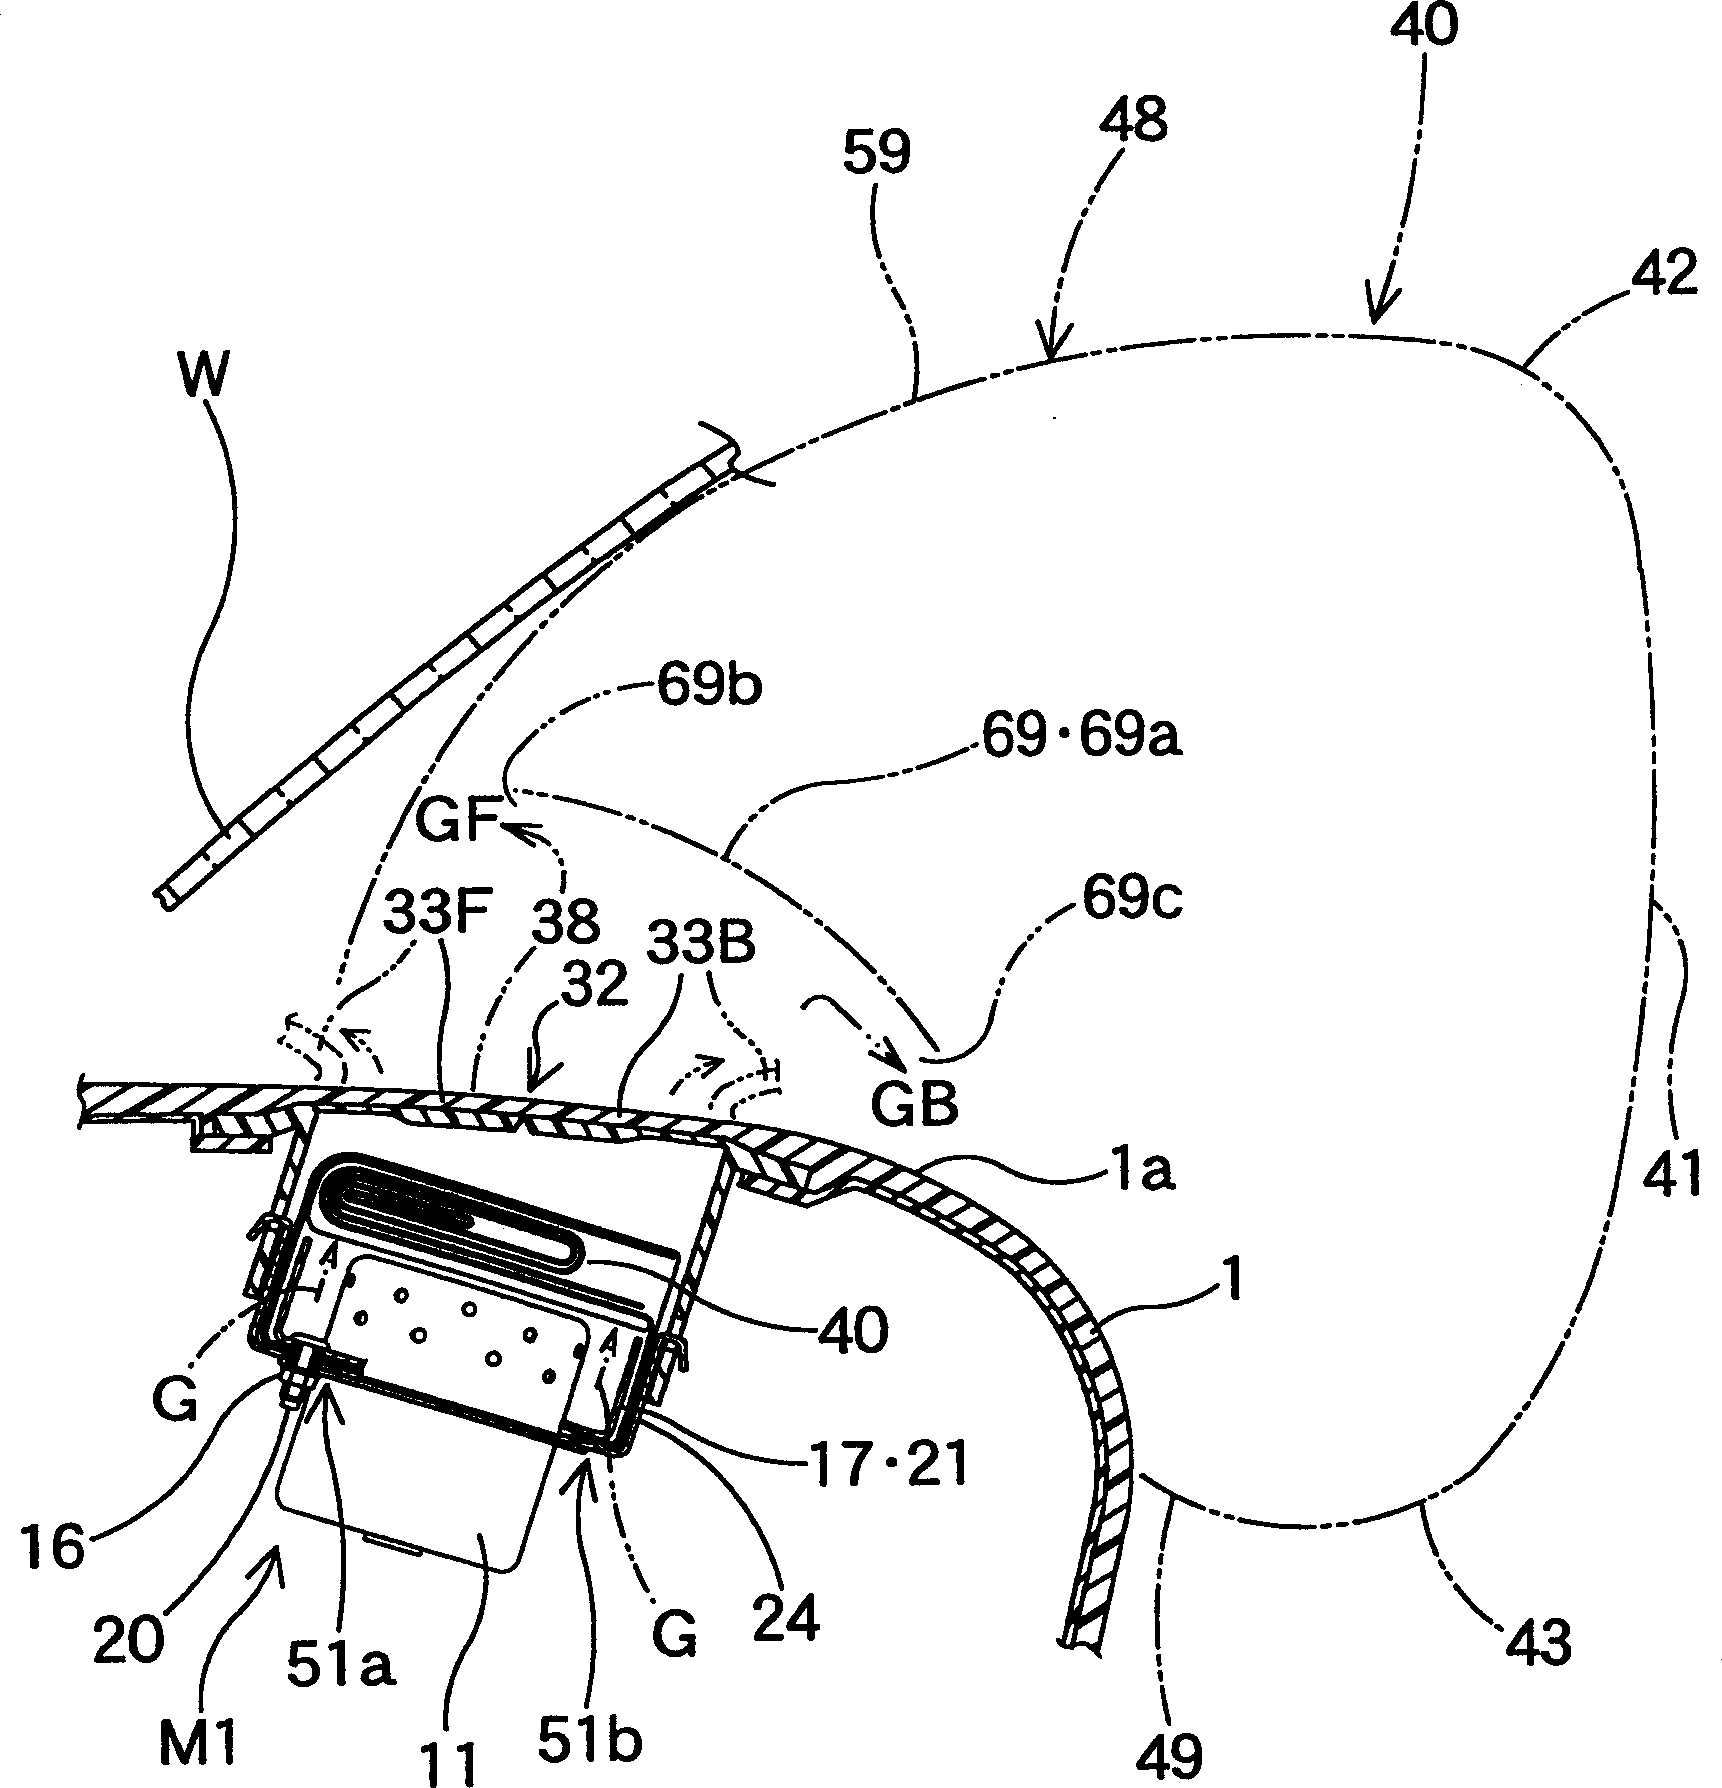 Airbag device for front passenger's seat